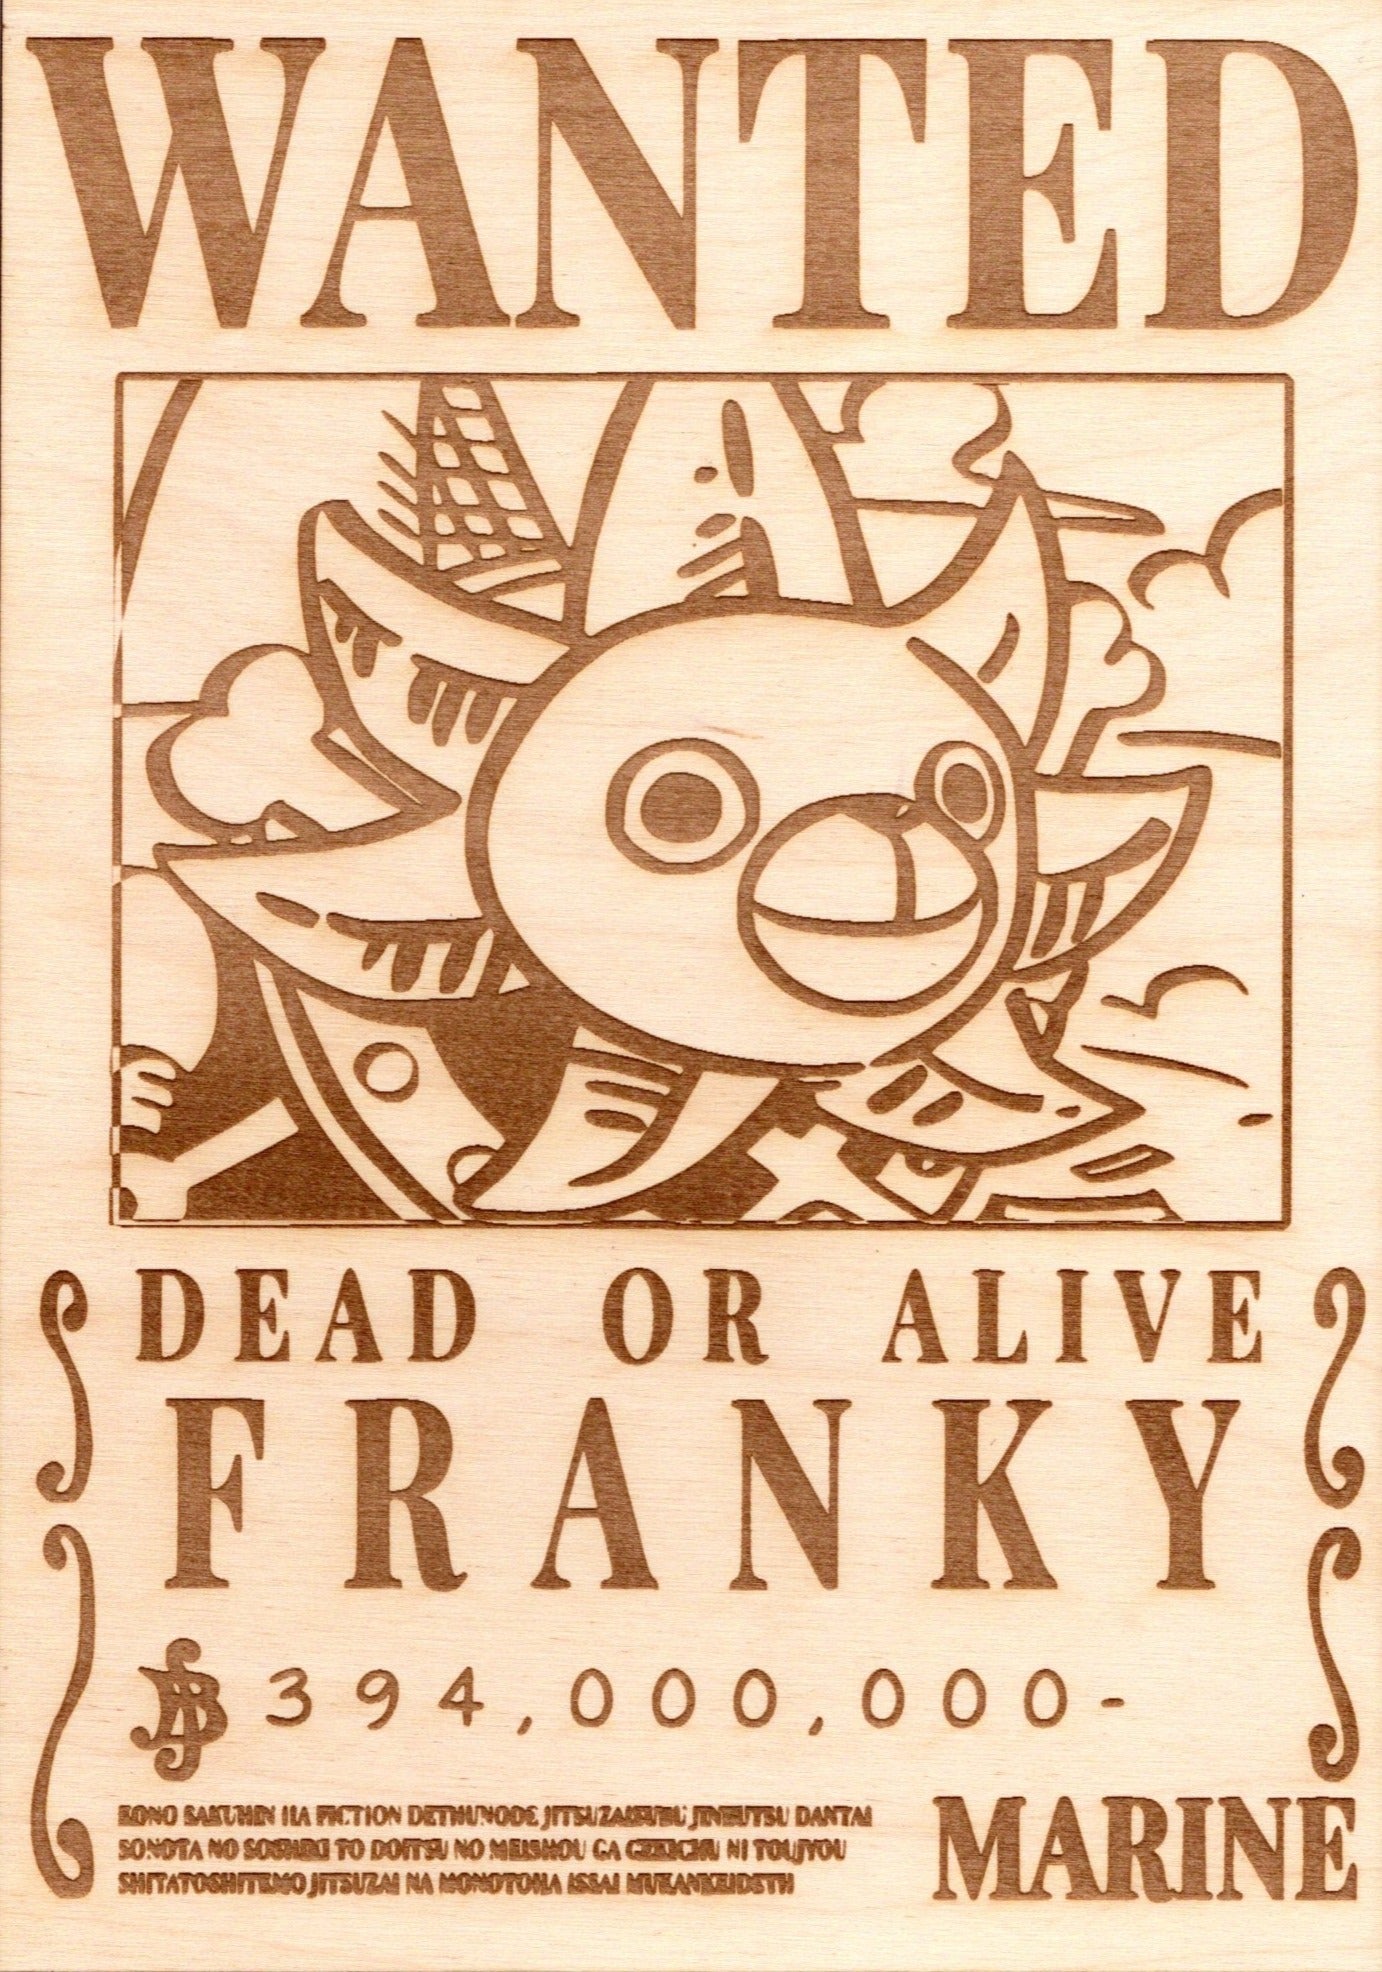 One Piece - Franky (Updated Bounty) Wooden Wanted Poster